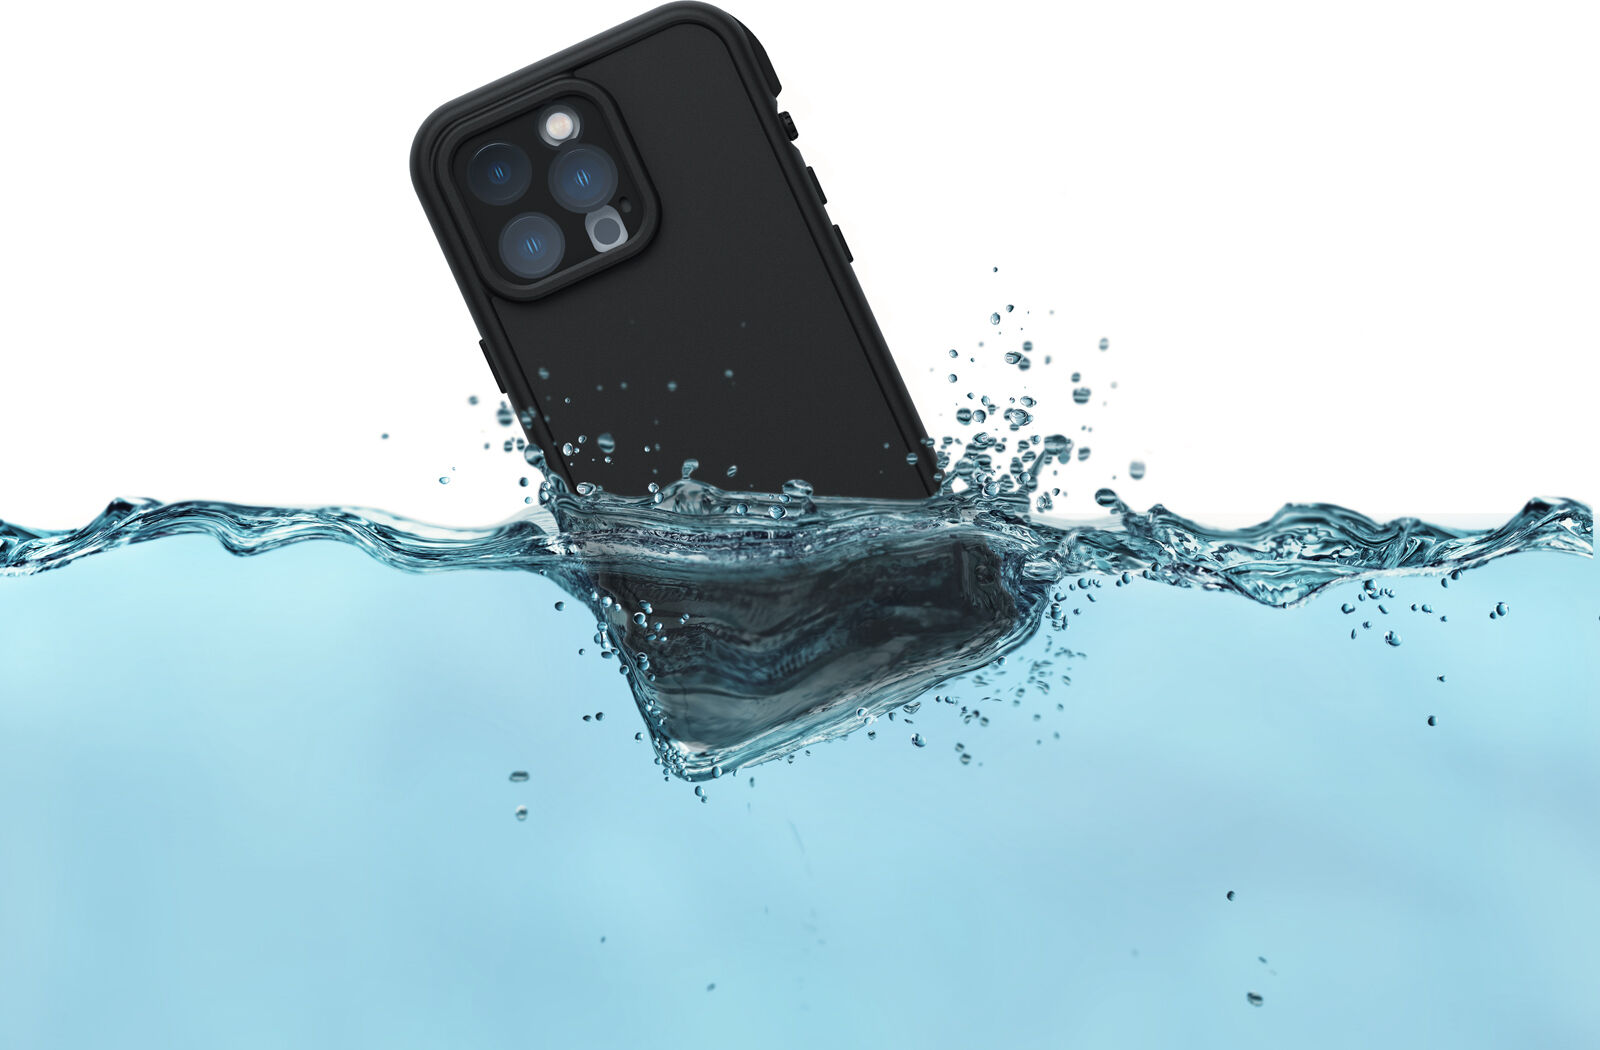 Take FRĒ, the WaterProof case for iPhone 13 Pro, on every outing 